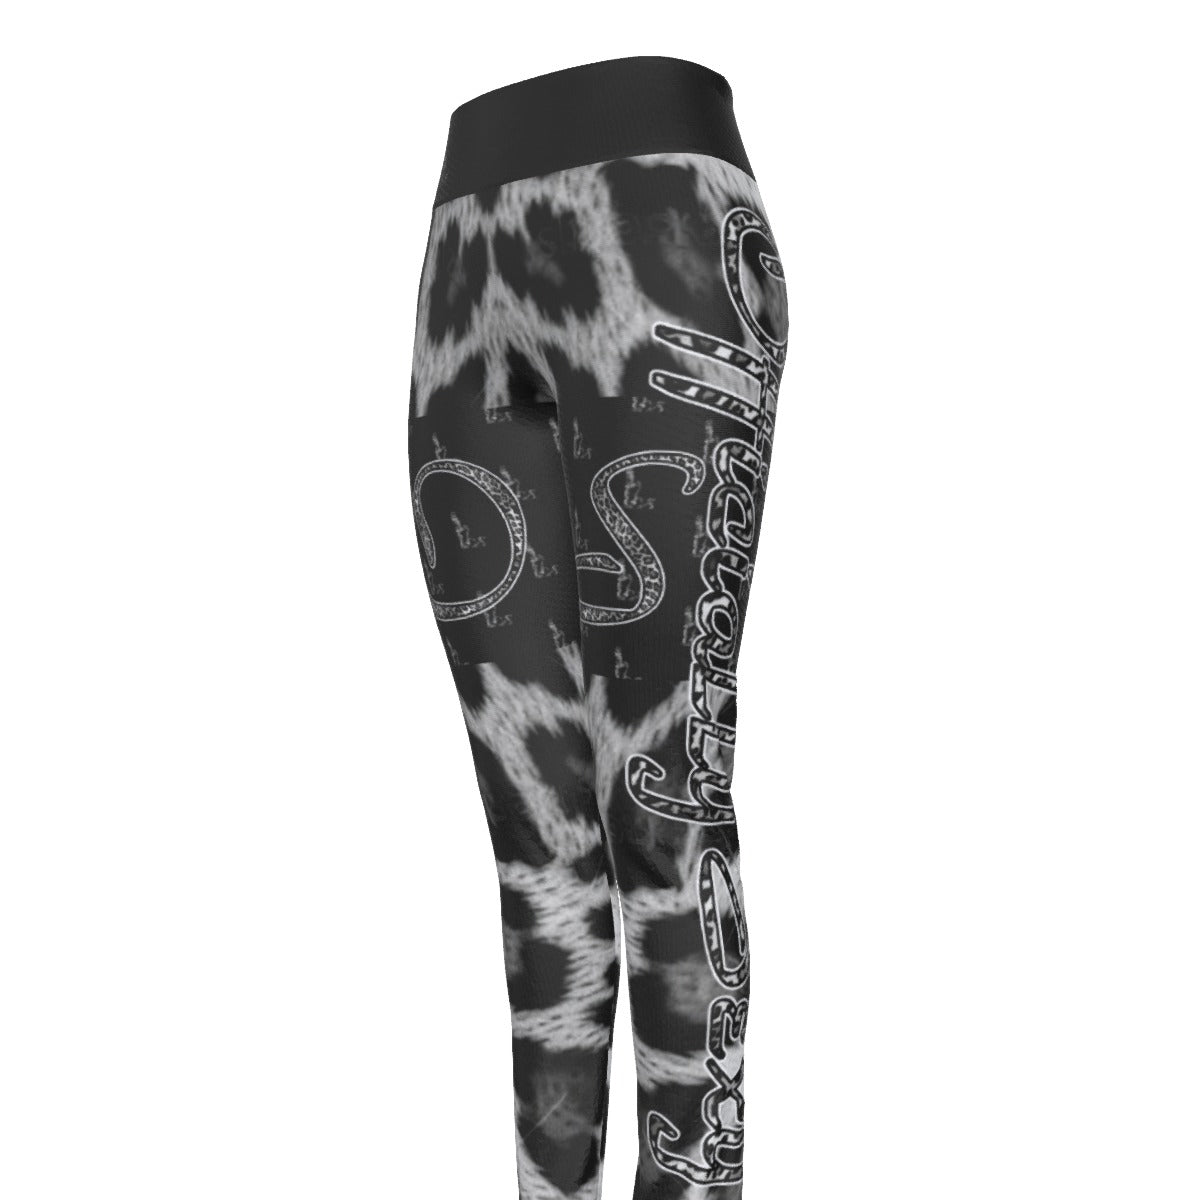 Officially Sexy Snow Leopard Print Collection Women's Black High Waist Thigh High Booty Popper Leggings #2 (English) 4